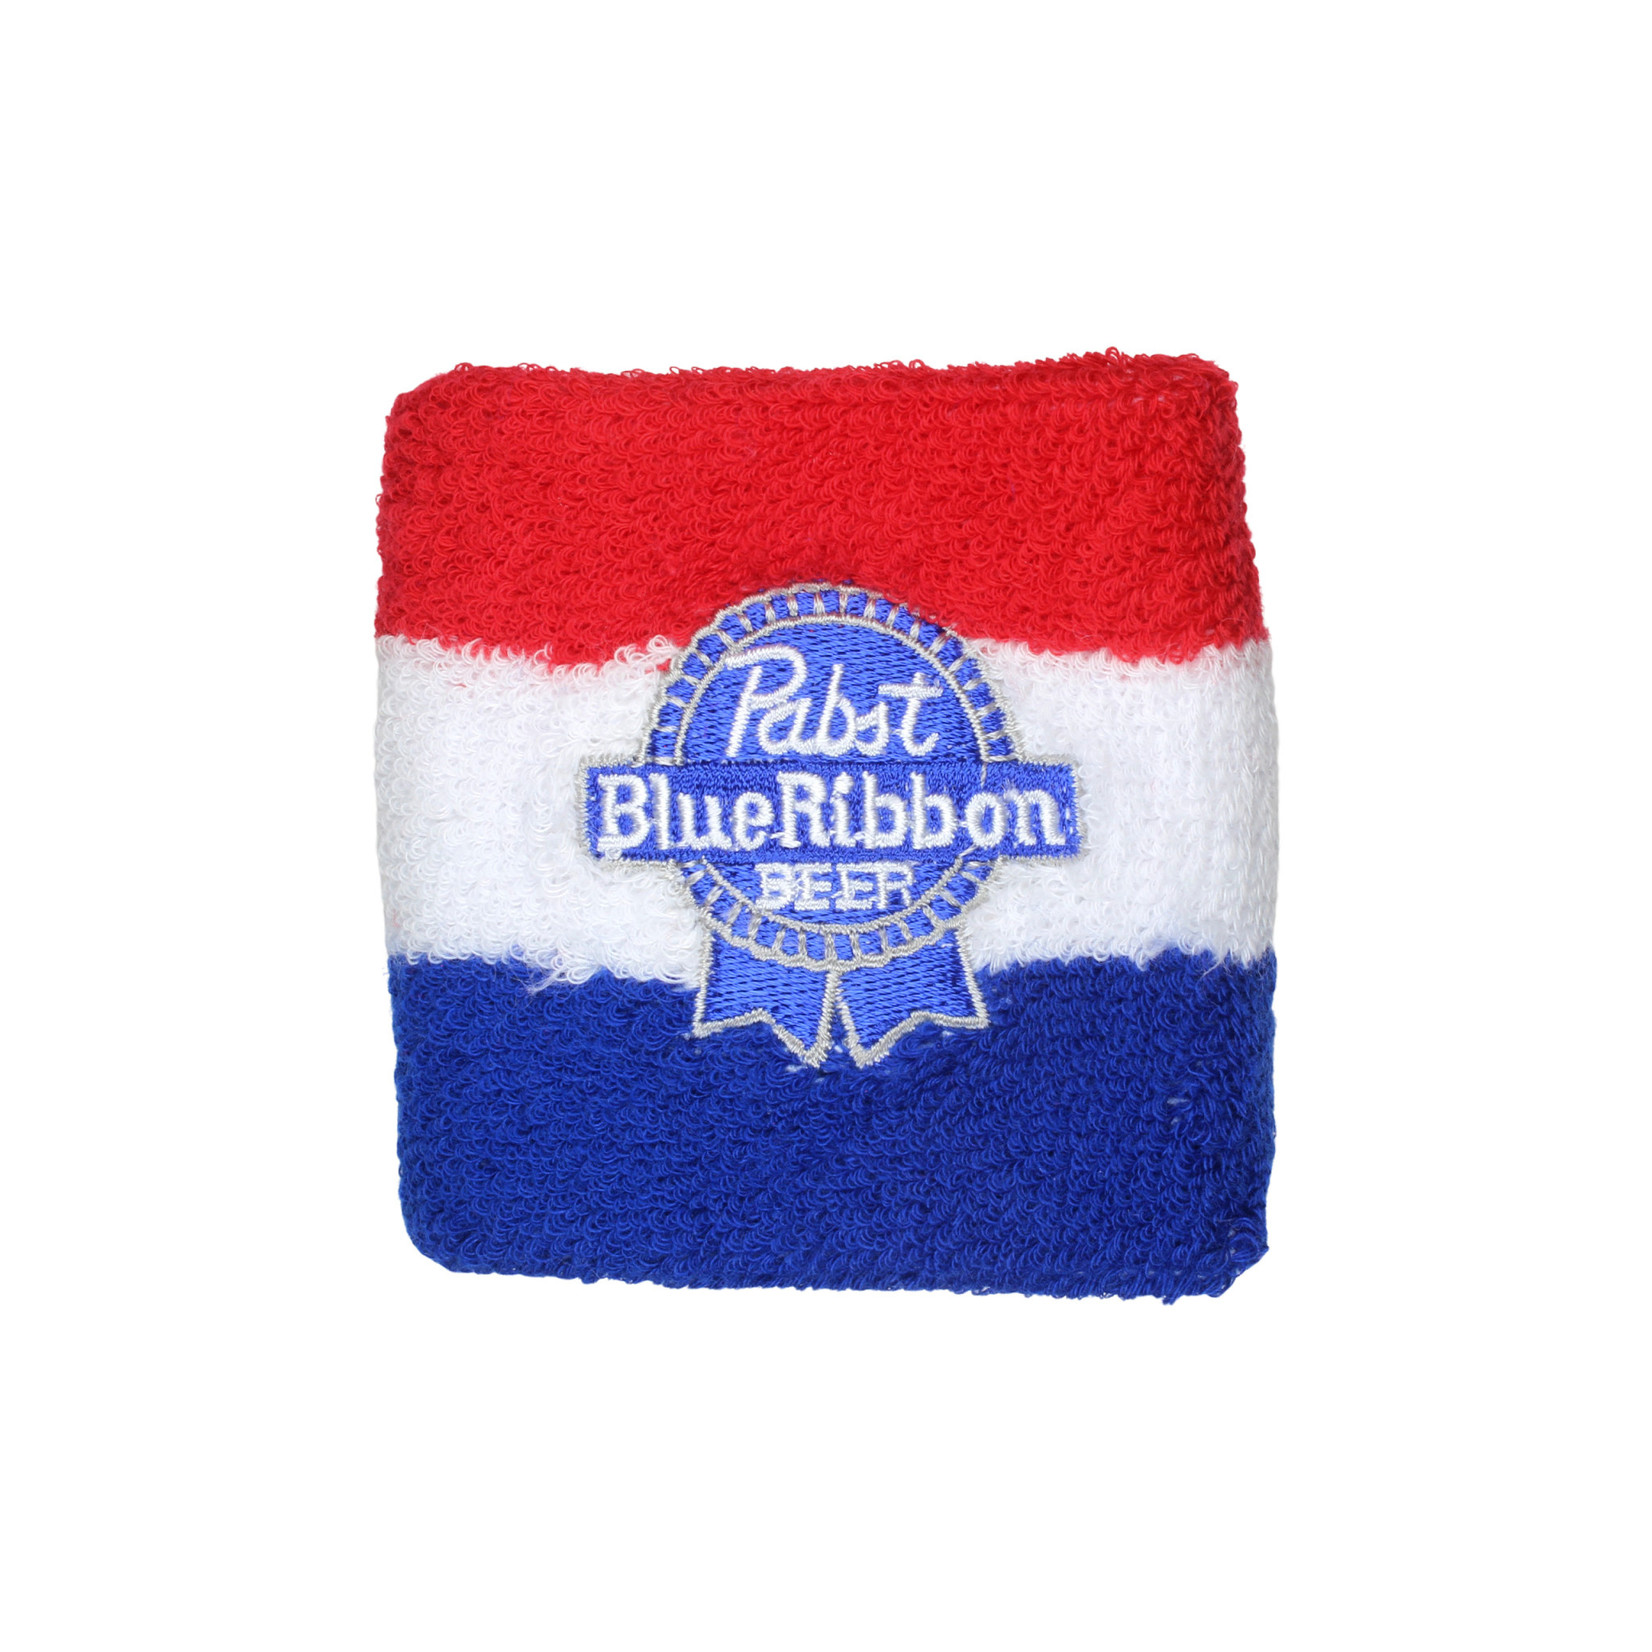 Pabst Pabst Wristband